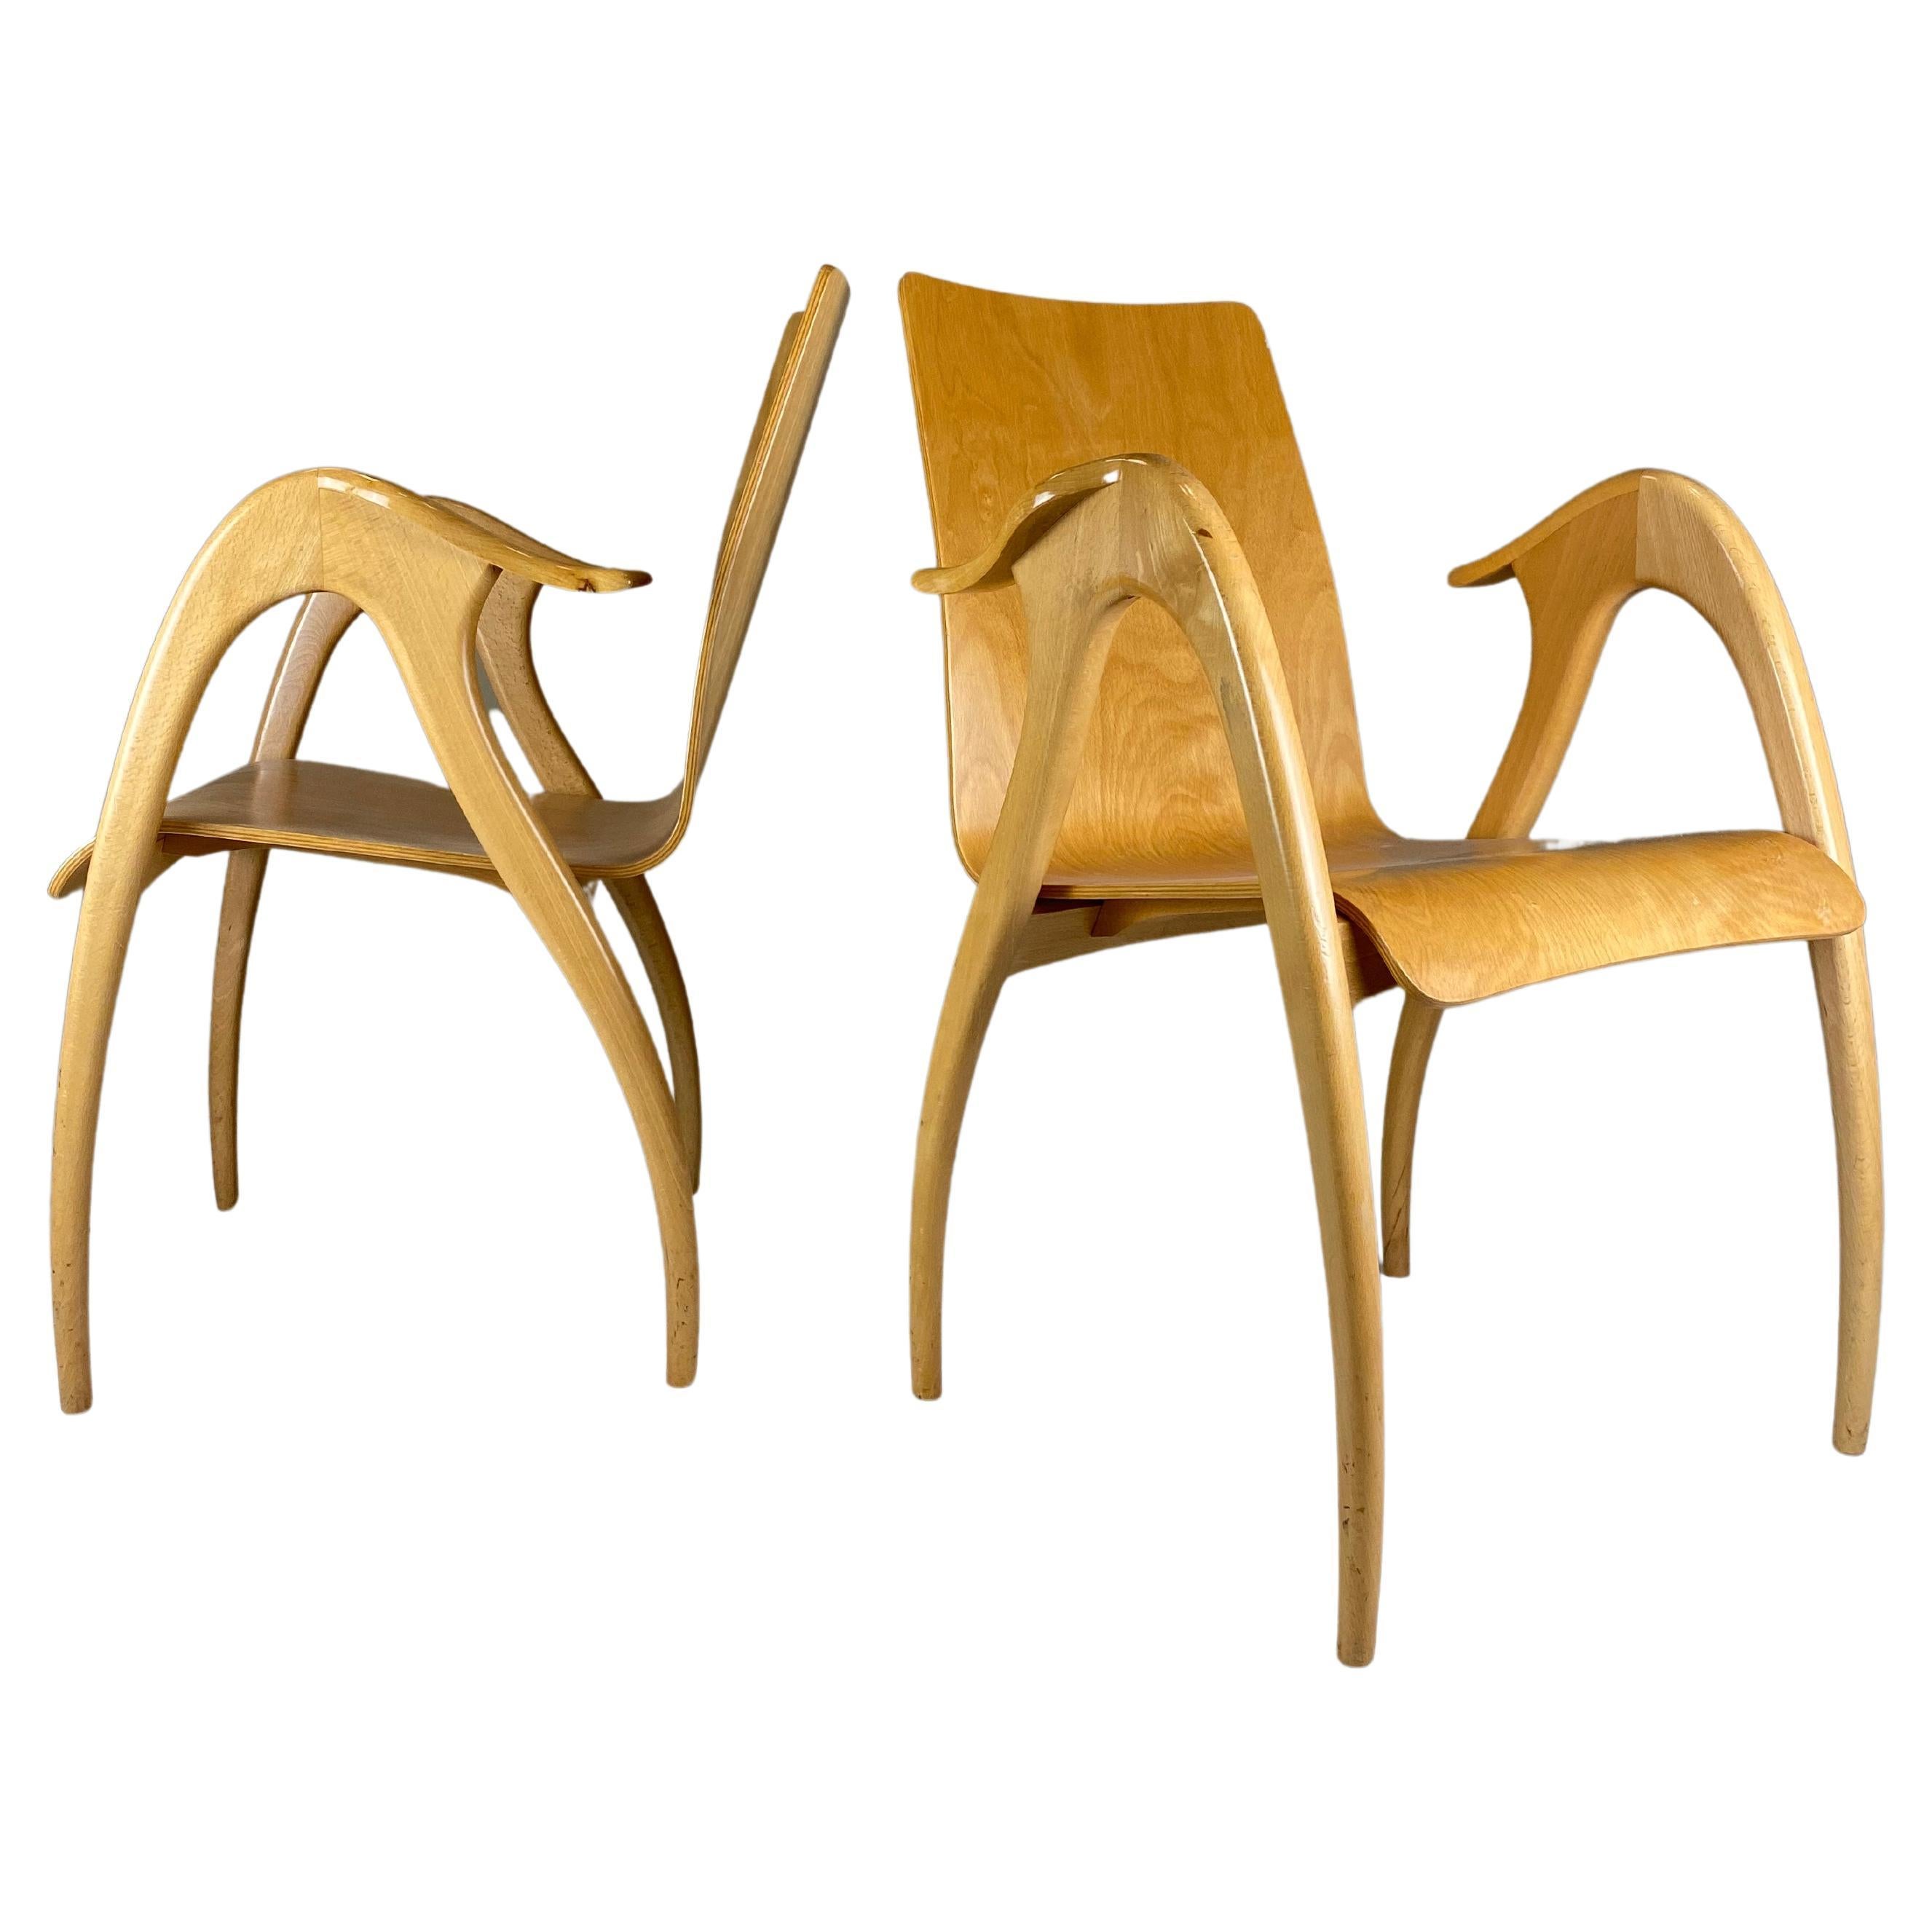 Set of 4 Sculptural Plywood Armchairs by Malatesta and Mason, 1950s, Mid-Century For Sale